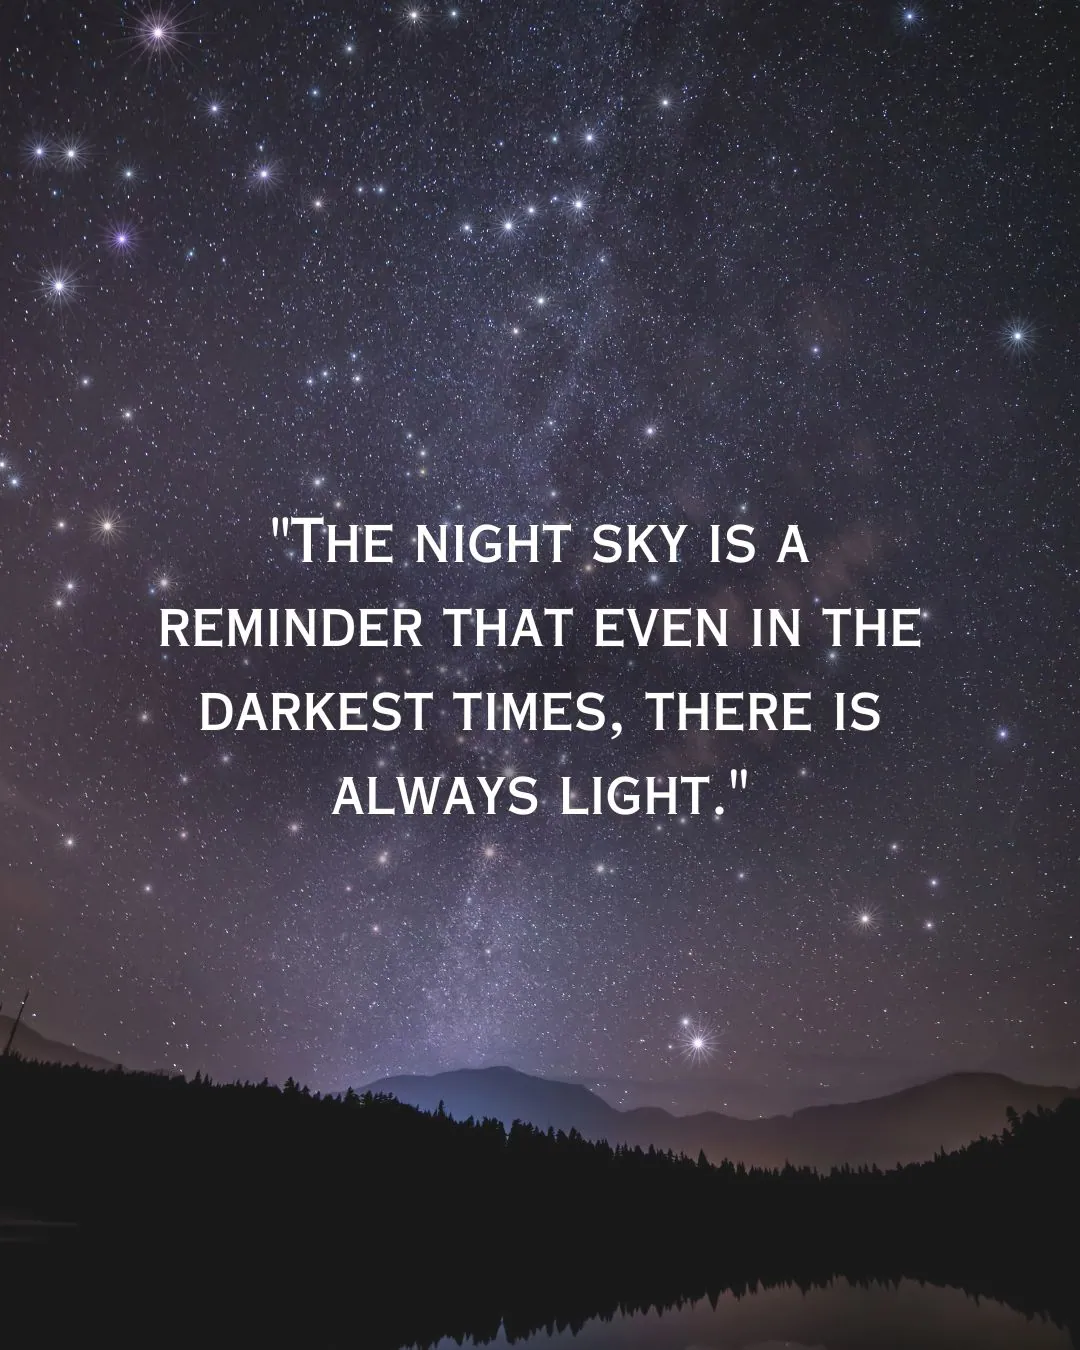 Meaningful Night Sky Quotes for Instagram Image 2